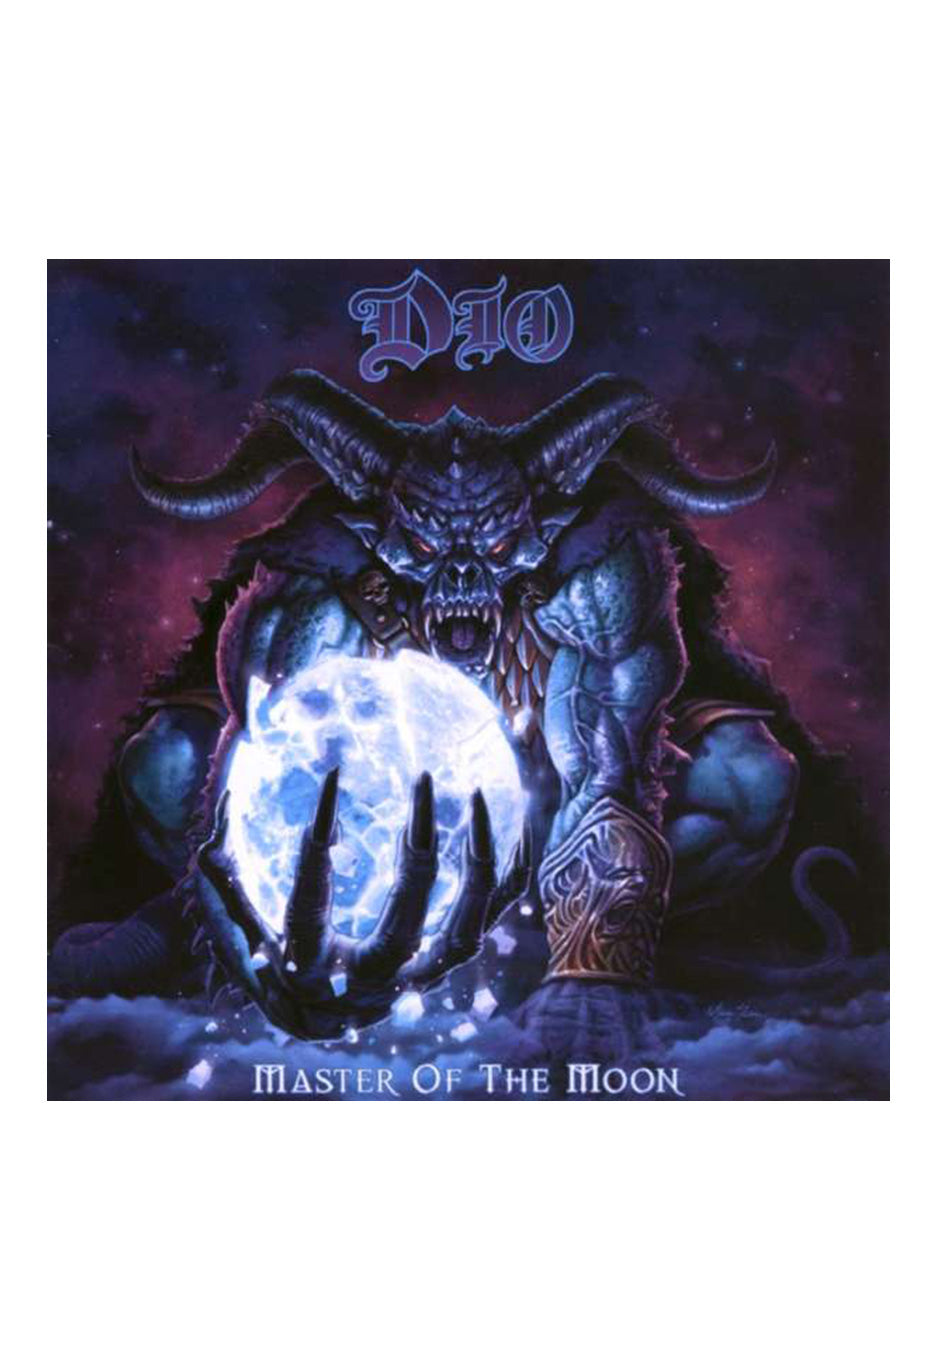 Dio - Master Of The Moon (Remastered) - Vinyl